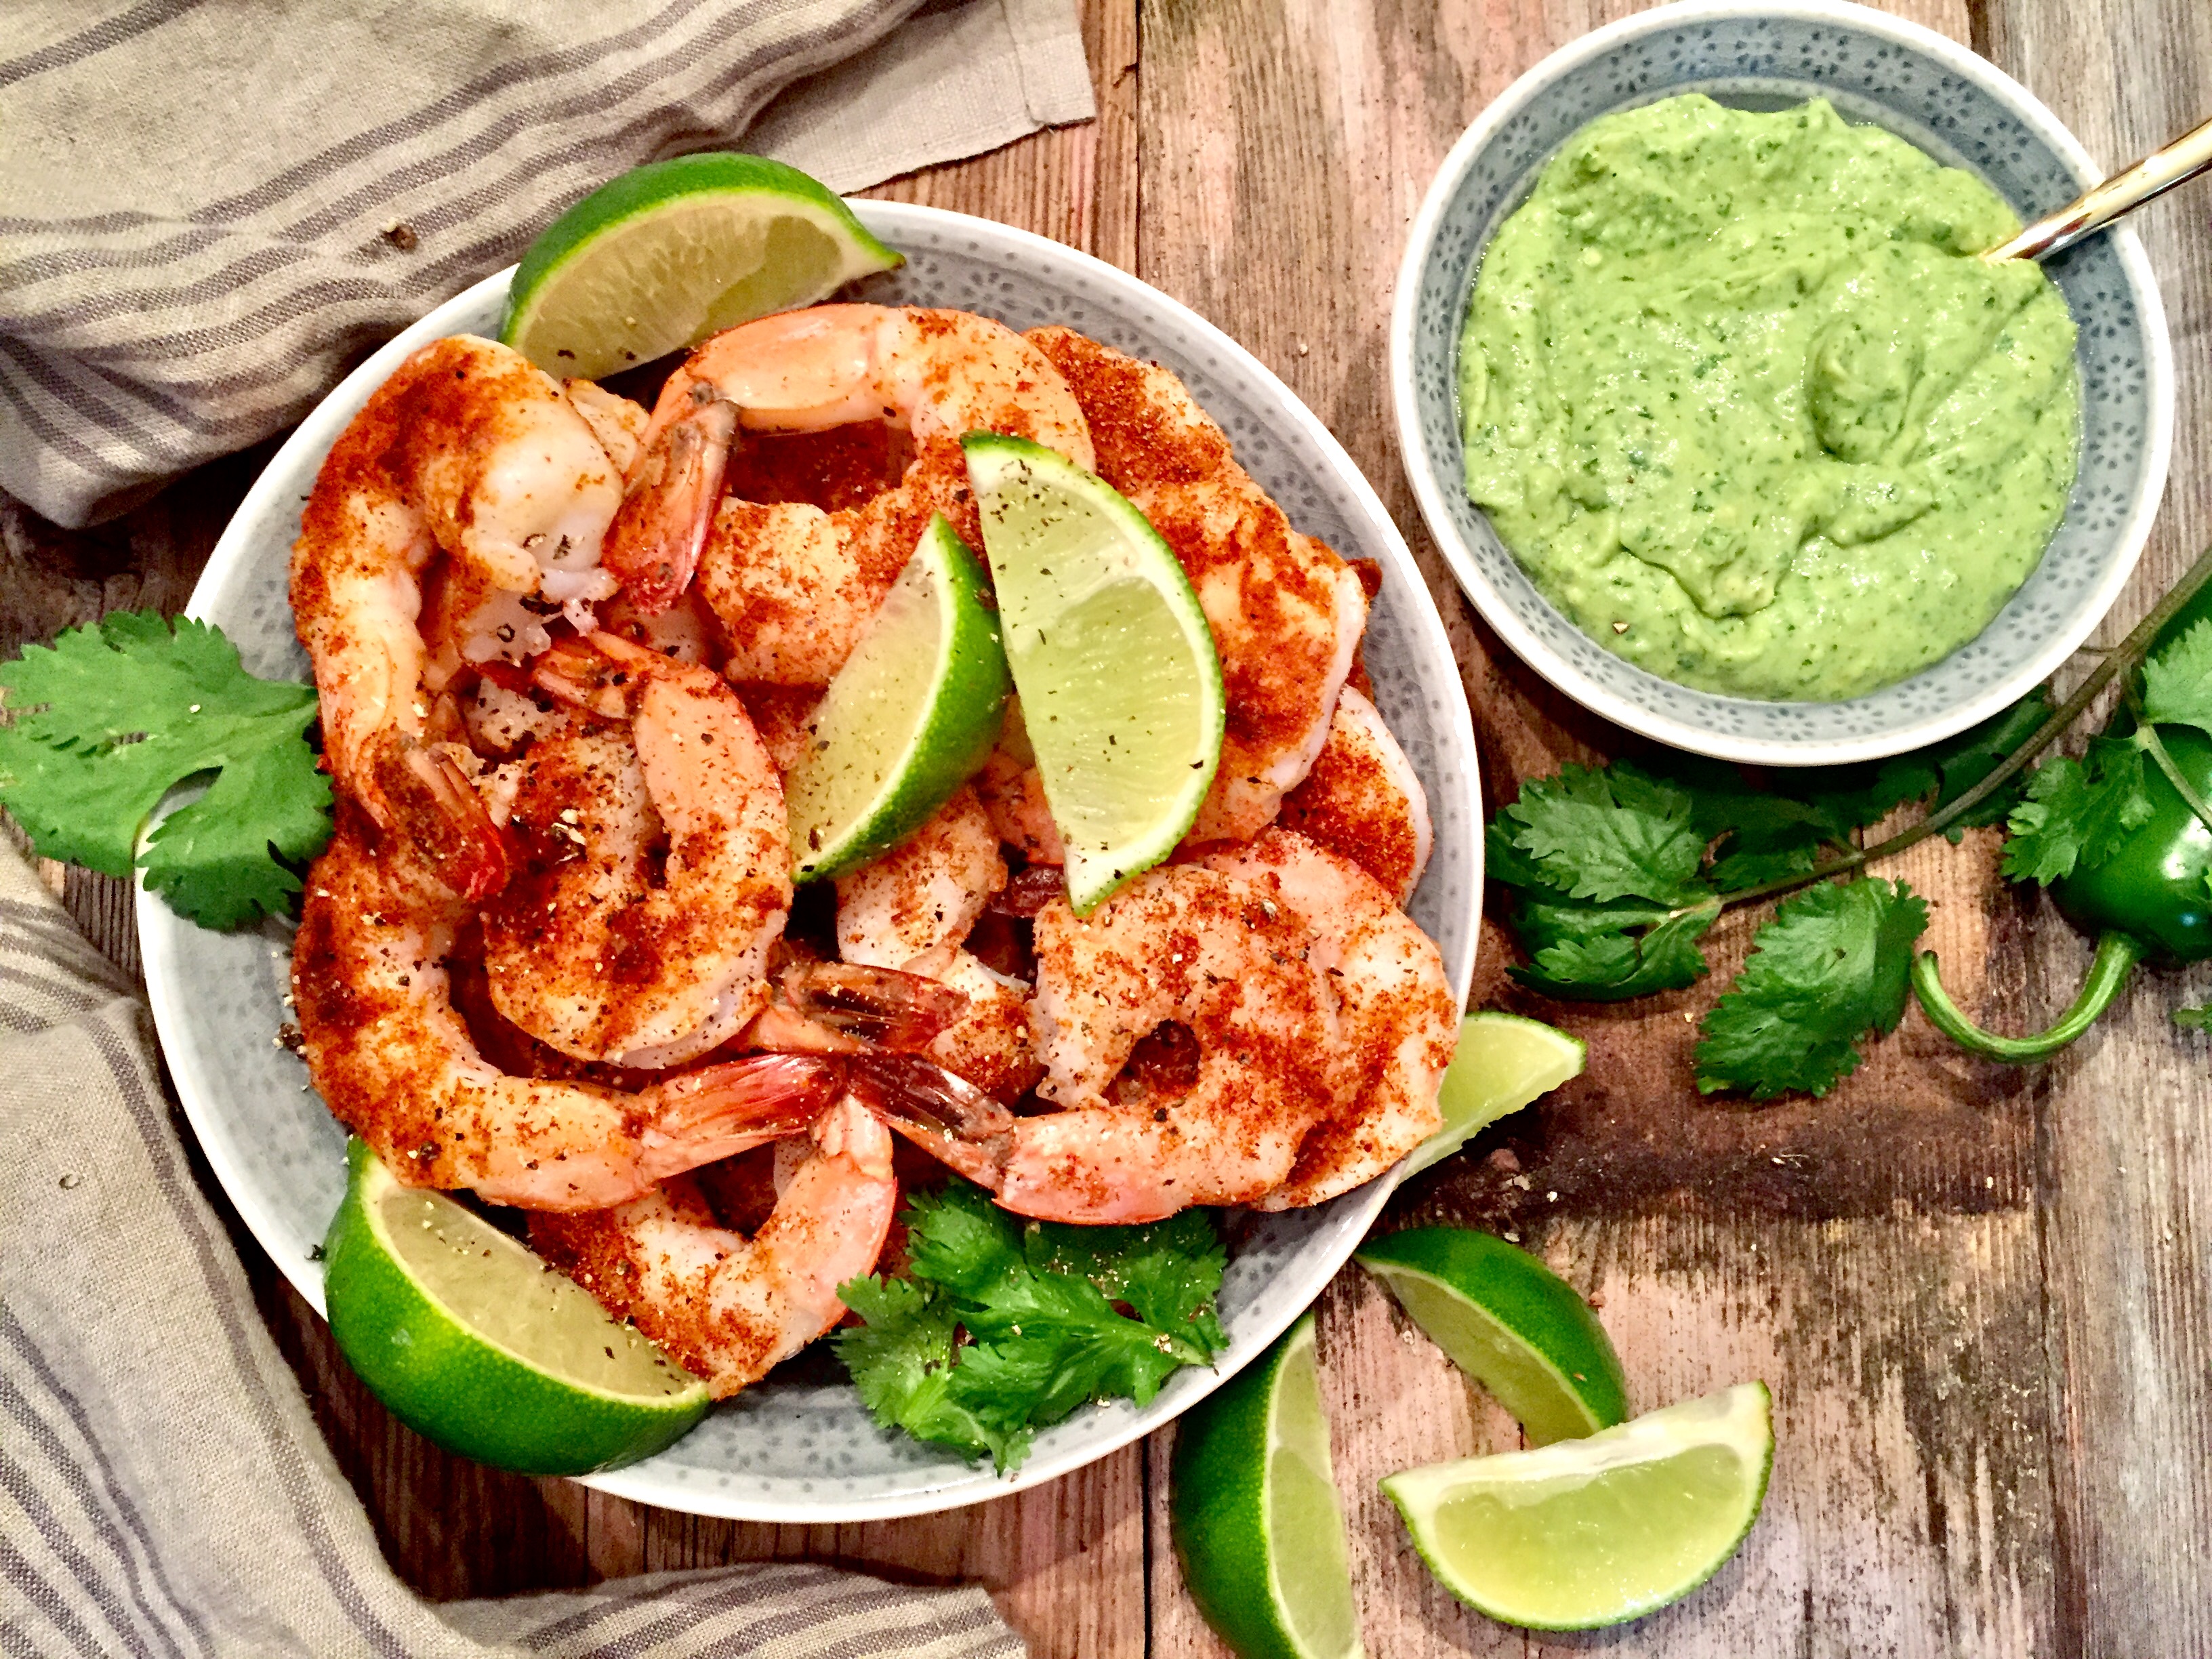 Spicy Shrimp with an Avocado Dipping Sauce